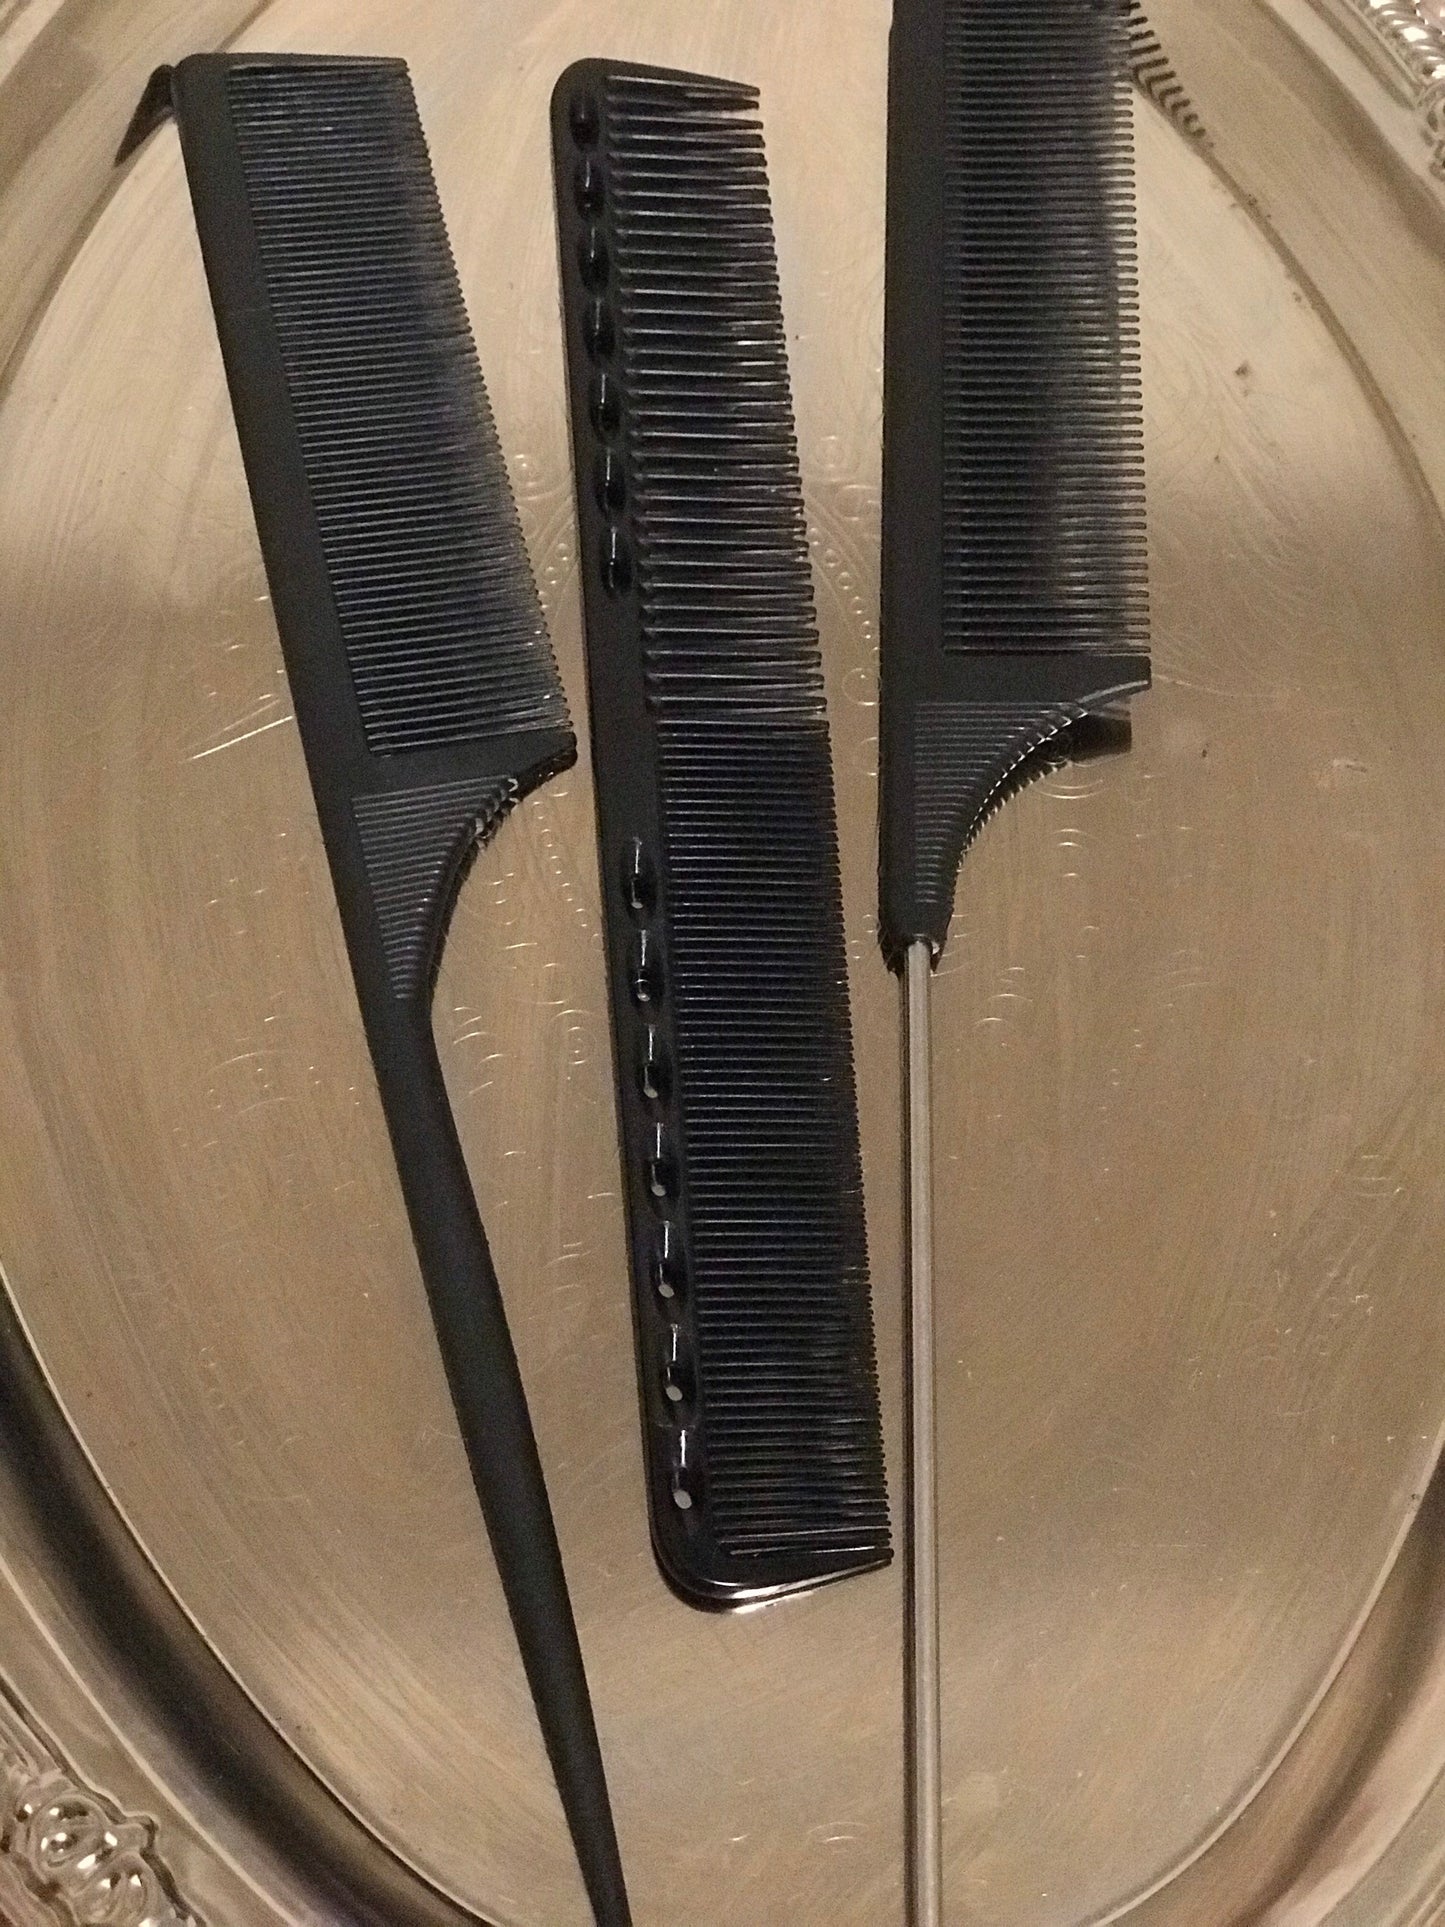 Heat & Chemical Resistant Antistatic Carbon Combs